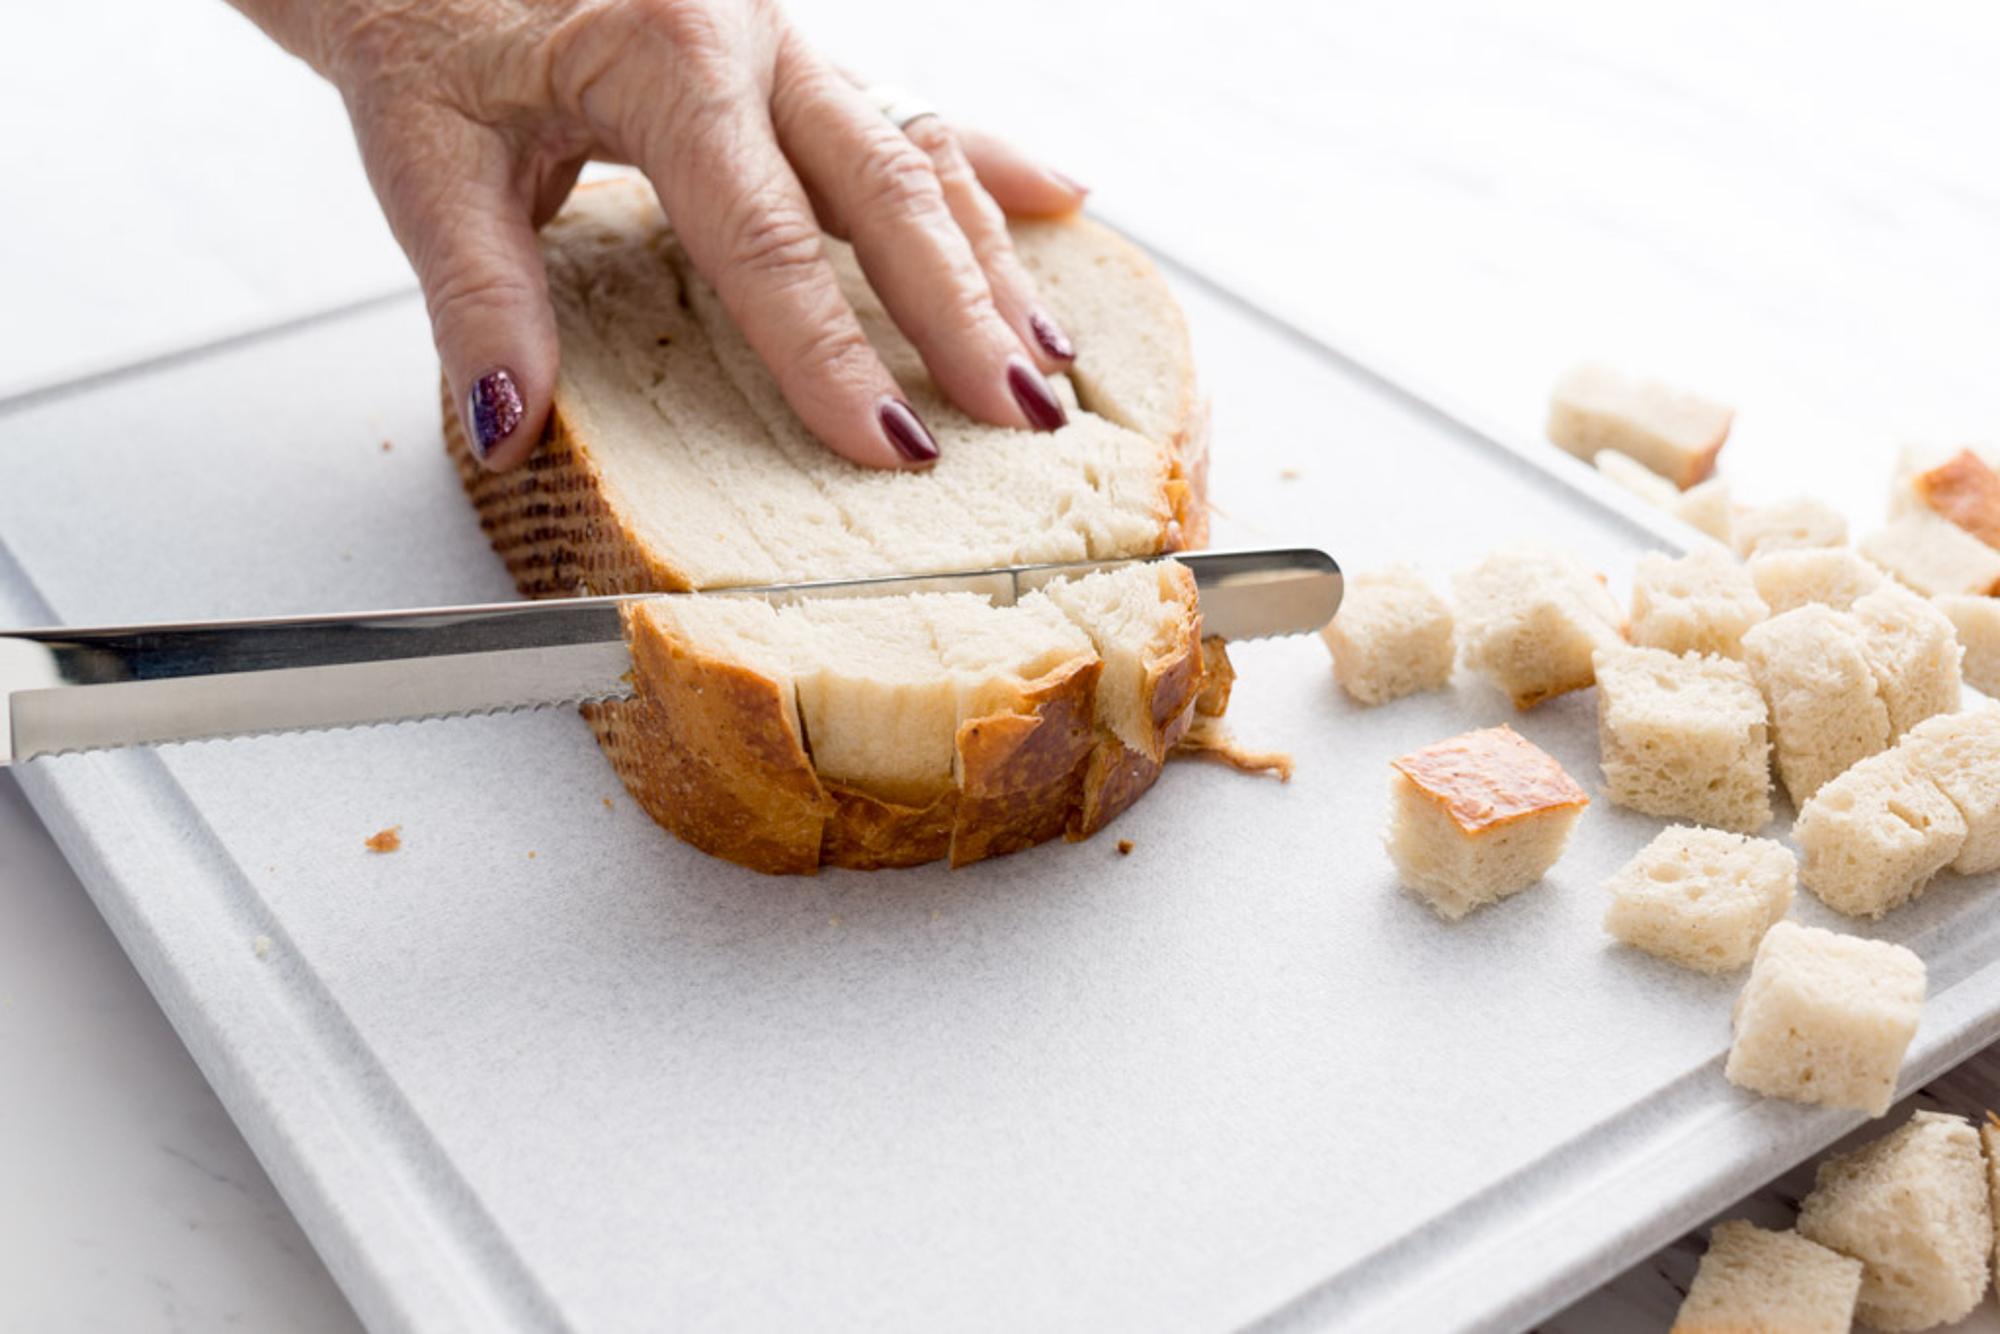 Slicing the bread into cubes.